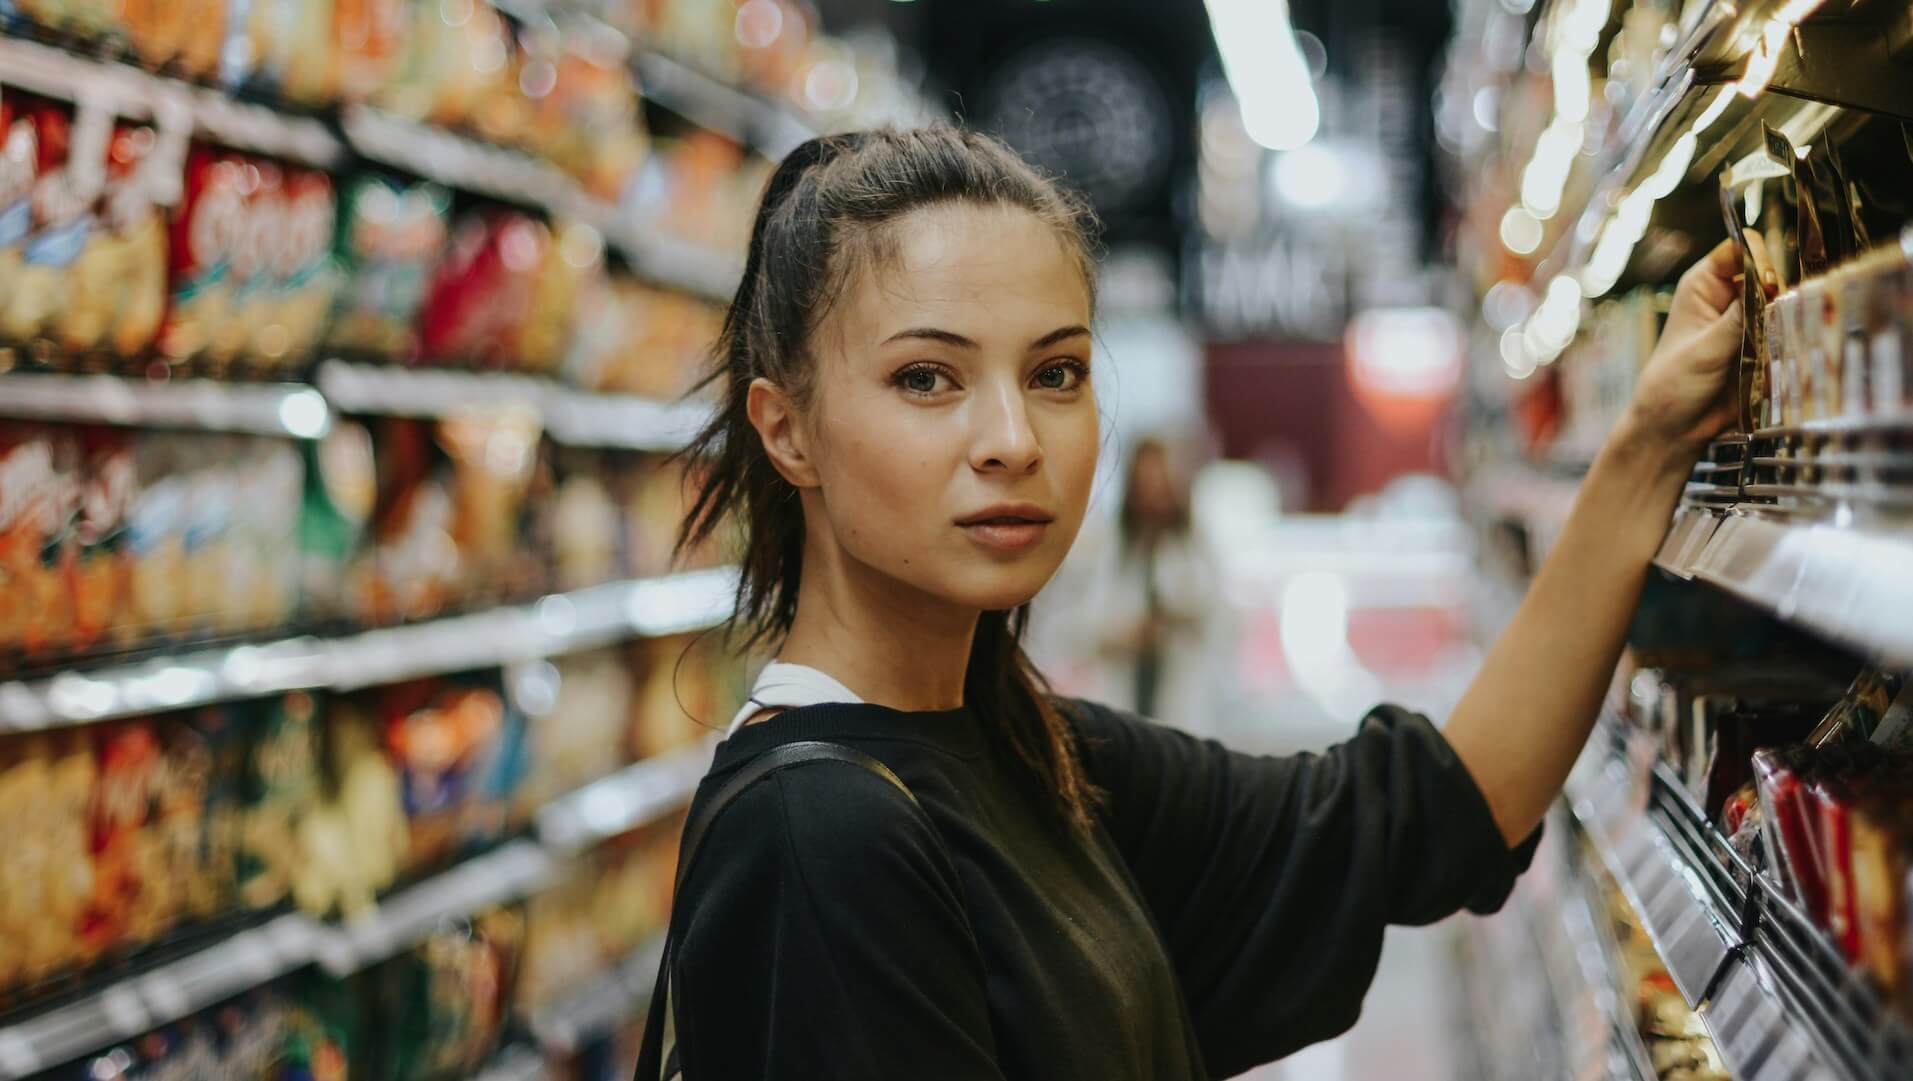 Gluten-free Living Add to Cart: woman at supermarket picking items off the shelf